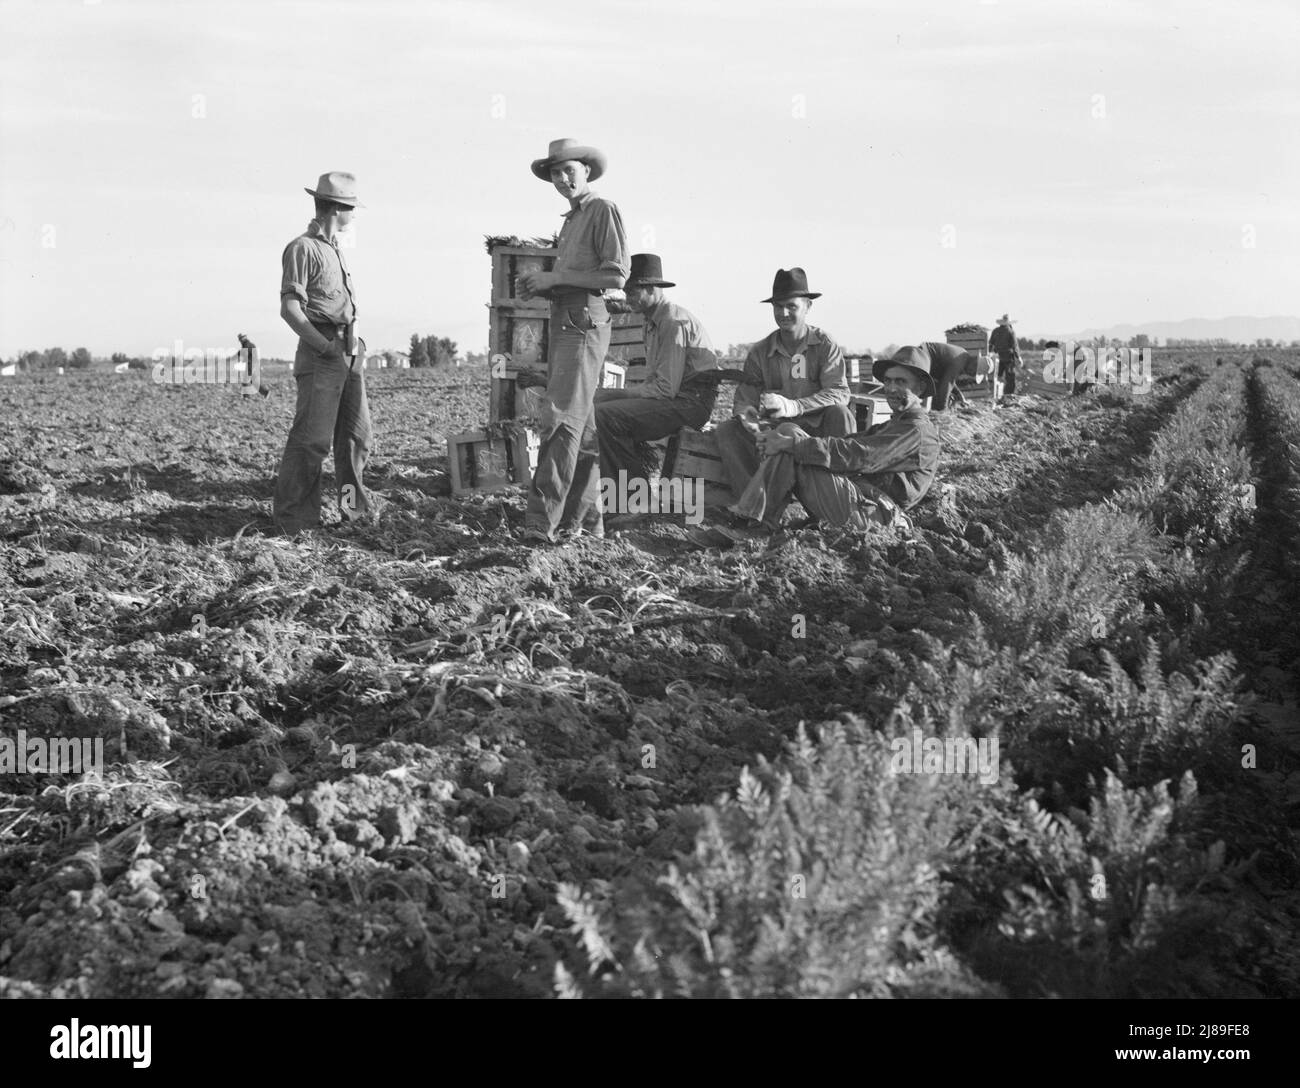 Large-scale agricultural gang labor, Mexicans and whites from the Southwest pull, clean, tie and crate carrots for the eastern market for eleven cents per crate of forty-eight bunches. Many can make barely one dollar a day. Heavy oversupply of labor and competition for jobs is keen. Near Meloland, Imperial Valley. Stock Photo